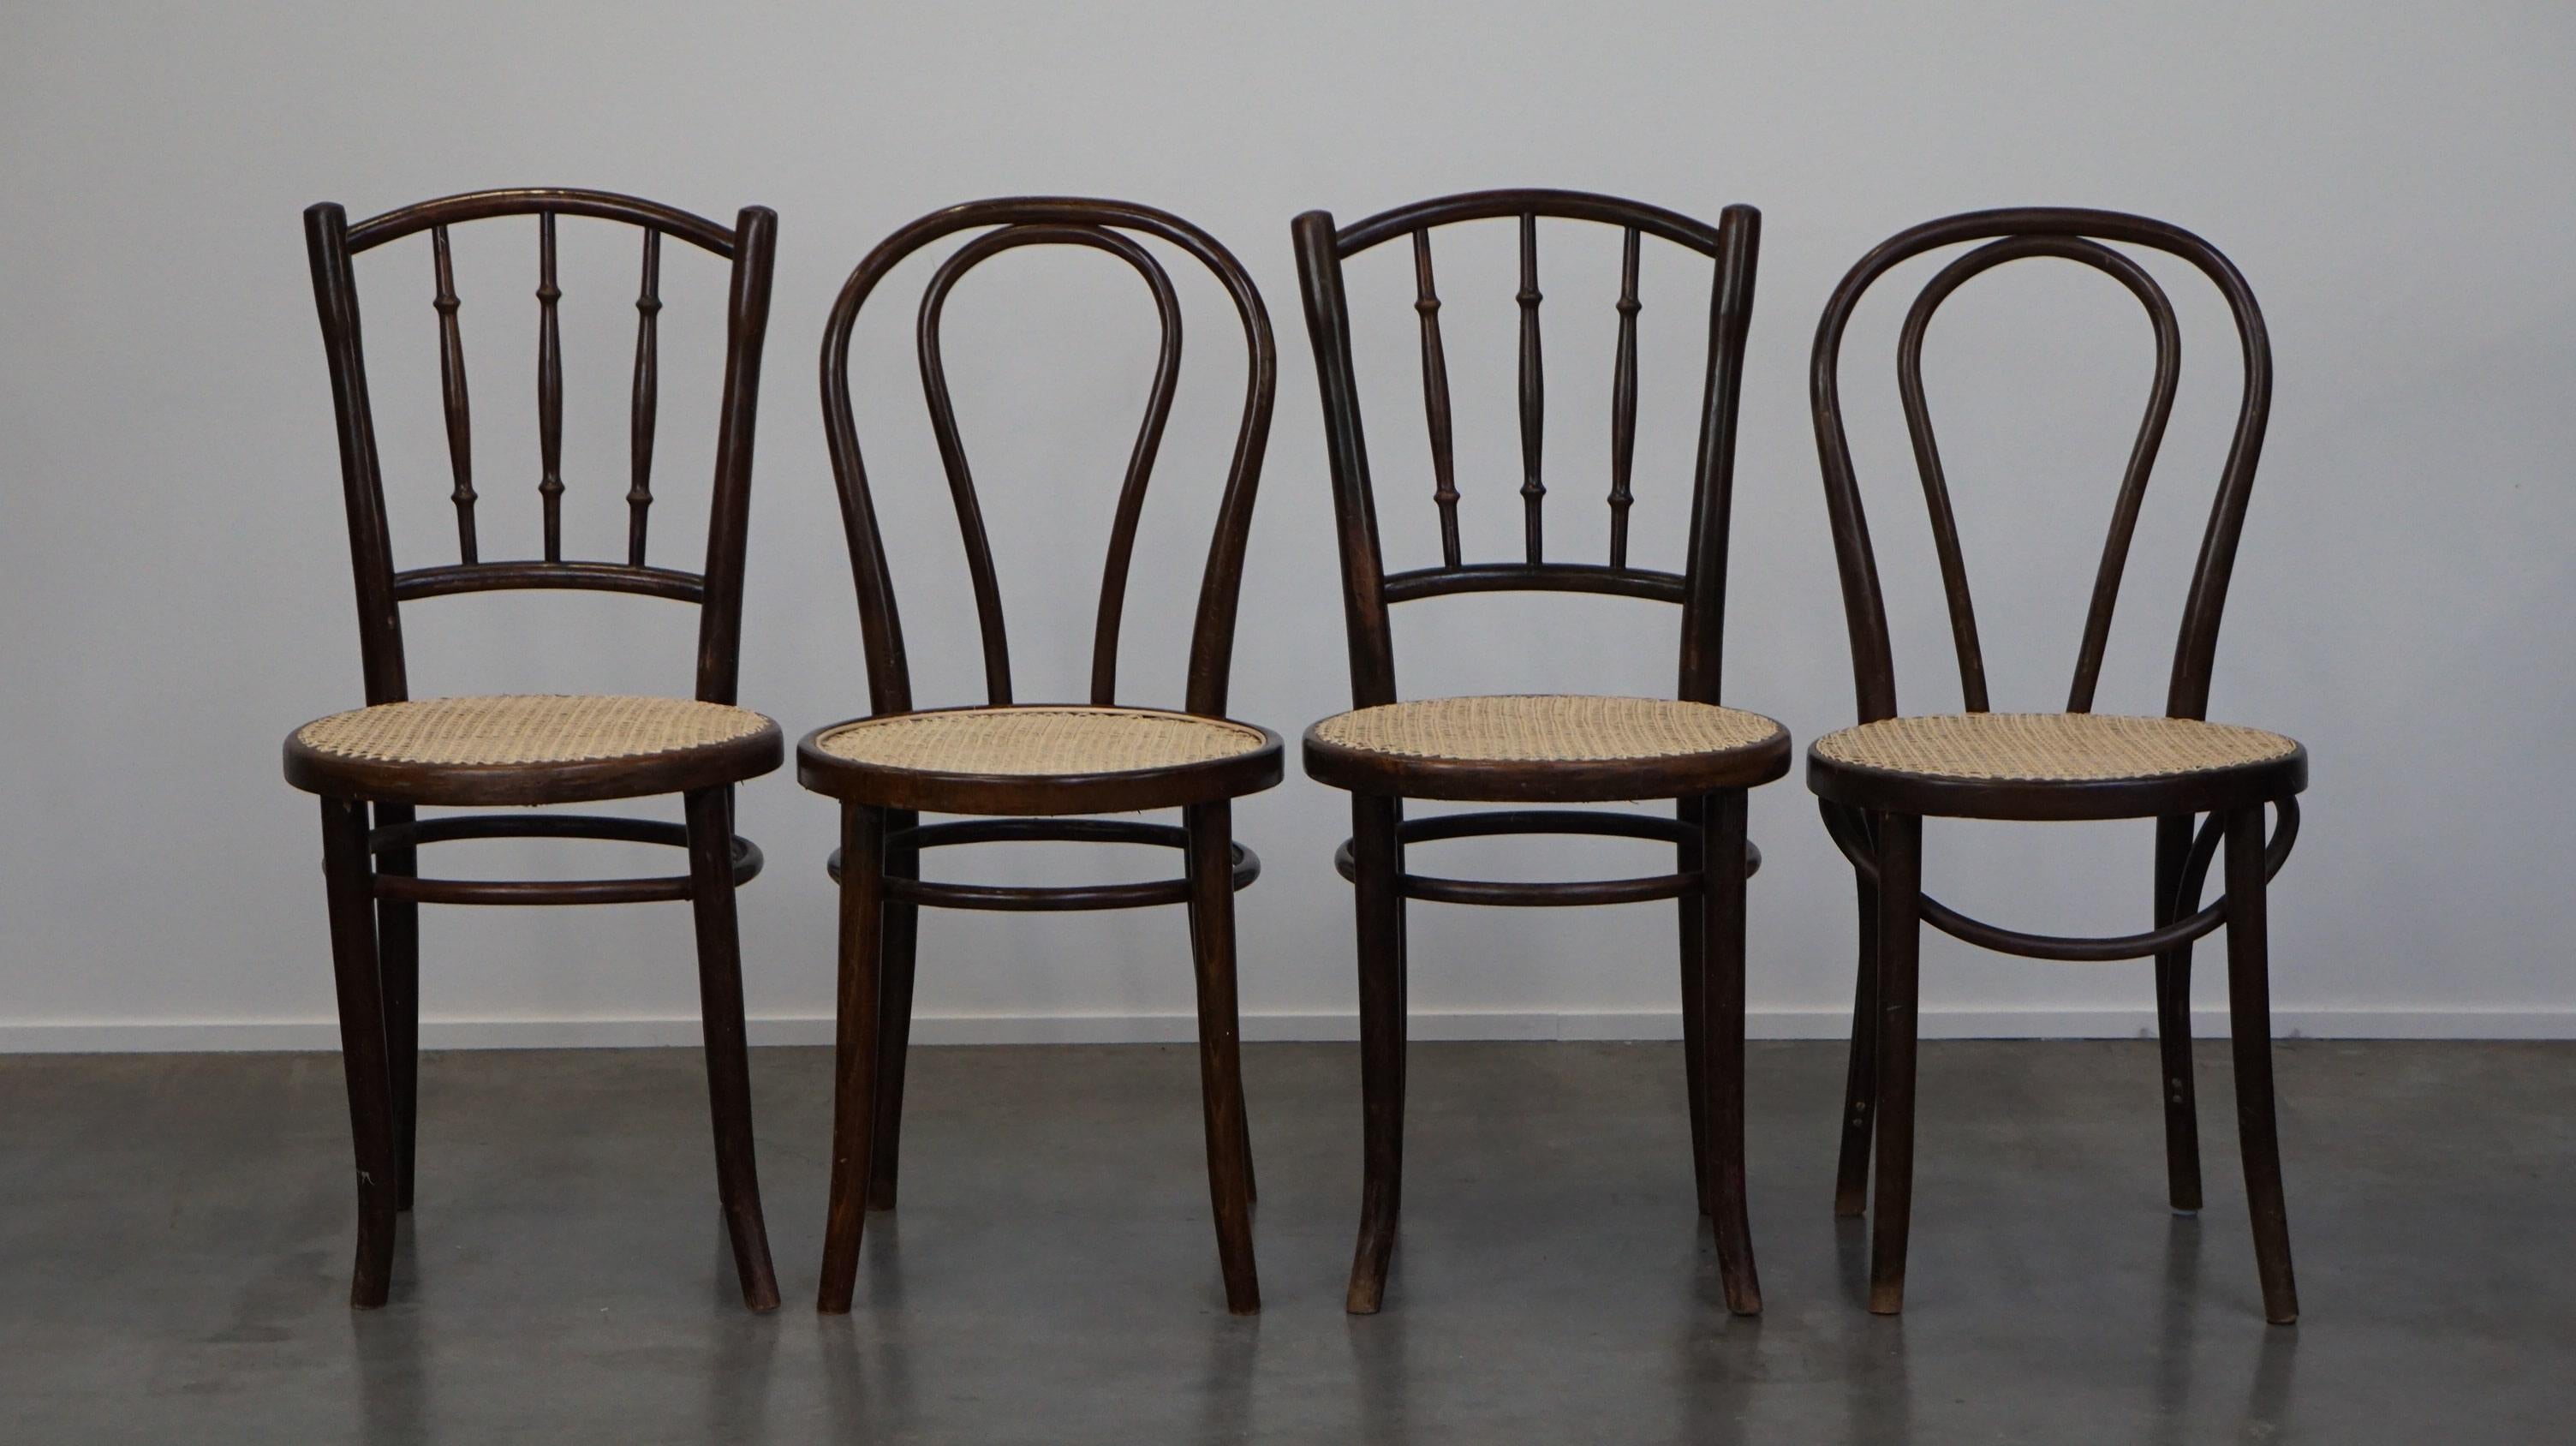 This beautiful set of Thonet chairs/dining chairs is super charming because as a combined set they have a playful look. The chairs have new hand-matte seats and they are still in good condition. For their age, they have normal signs of use and, as